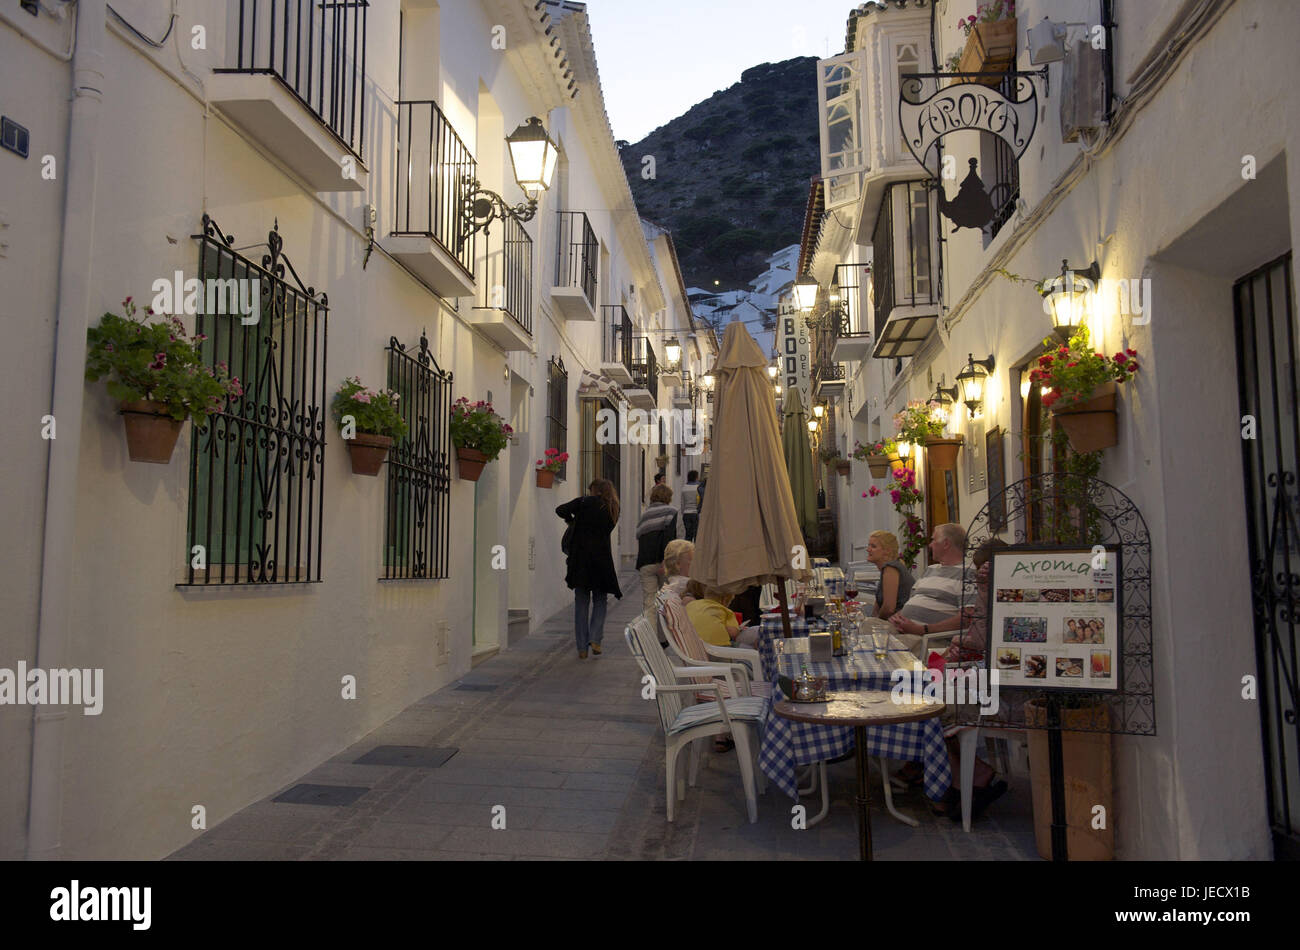 At night Spain, Andalusia, Costa del Sol, Mijas, guests sit before a restaurant, Stock Photo